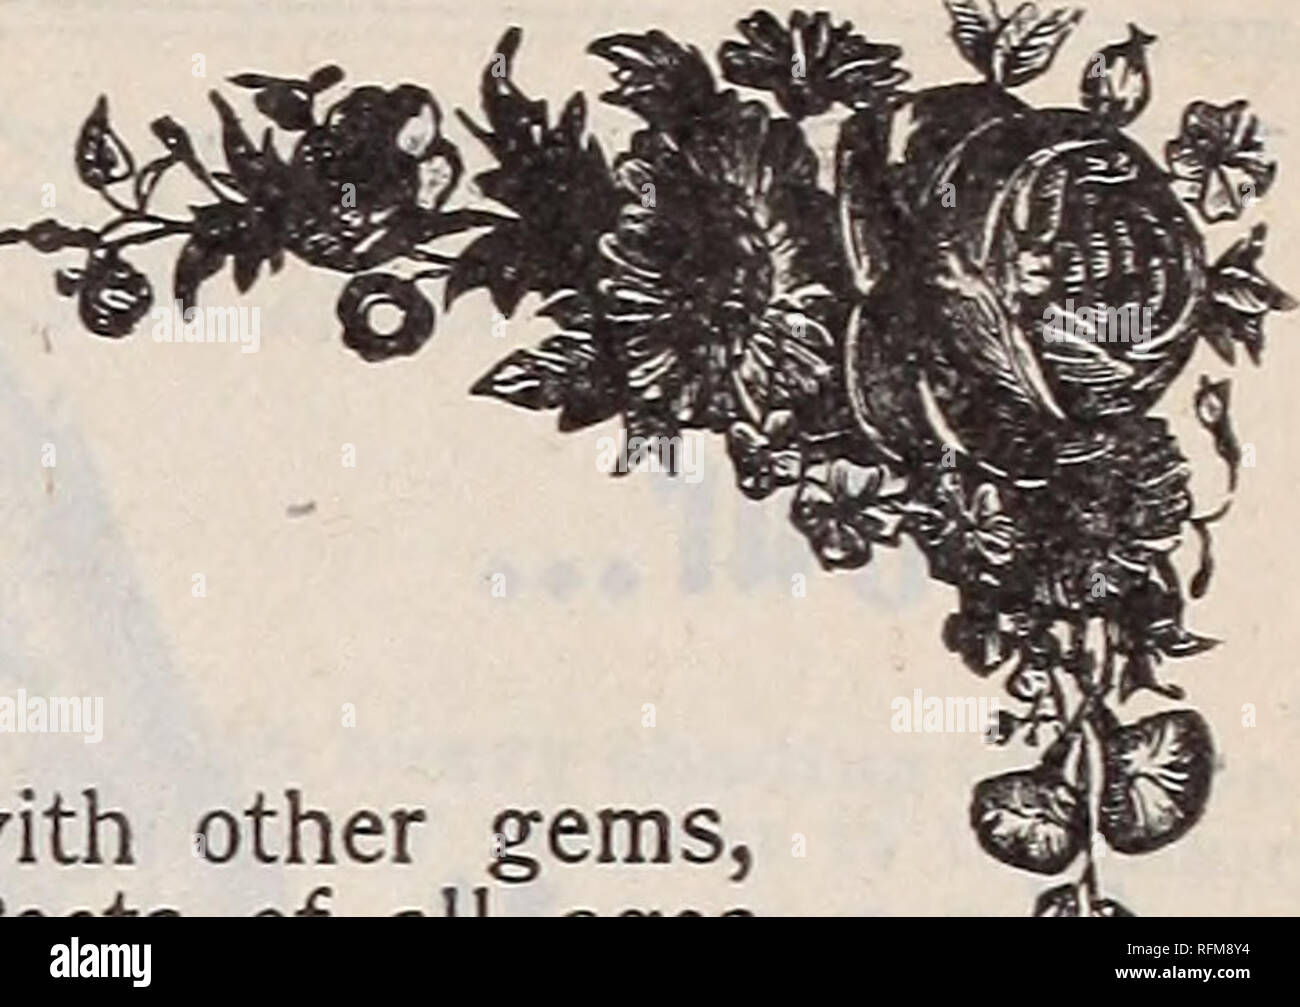 . The Geo. H. Mellen Co. : 1899. Nursery stock Ohio Catalogs; Bulbs (Plants) Catalogs; Flowers Seeds Catalogs; Plants, Ornamental Catalogs; Fruit Catalogs. ROSES. 1^ ^ $ $ ^ ^ S GOLD among the precious metals, and as the diamond compared with other gems, so is the Rose in its supremacy of loveliness among the flowers. Poets of all ages ^ have sung of its regent beauty, and by universal consent it has been crowned Queen ' of the Floral Kingdom. Roses are the fit adornment of happy homes. They are alike the solace of the lowly and the delight of the affluent. Among all classes and conditions o Stock Photo